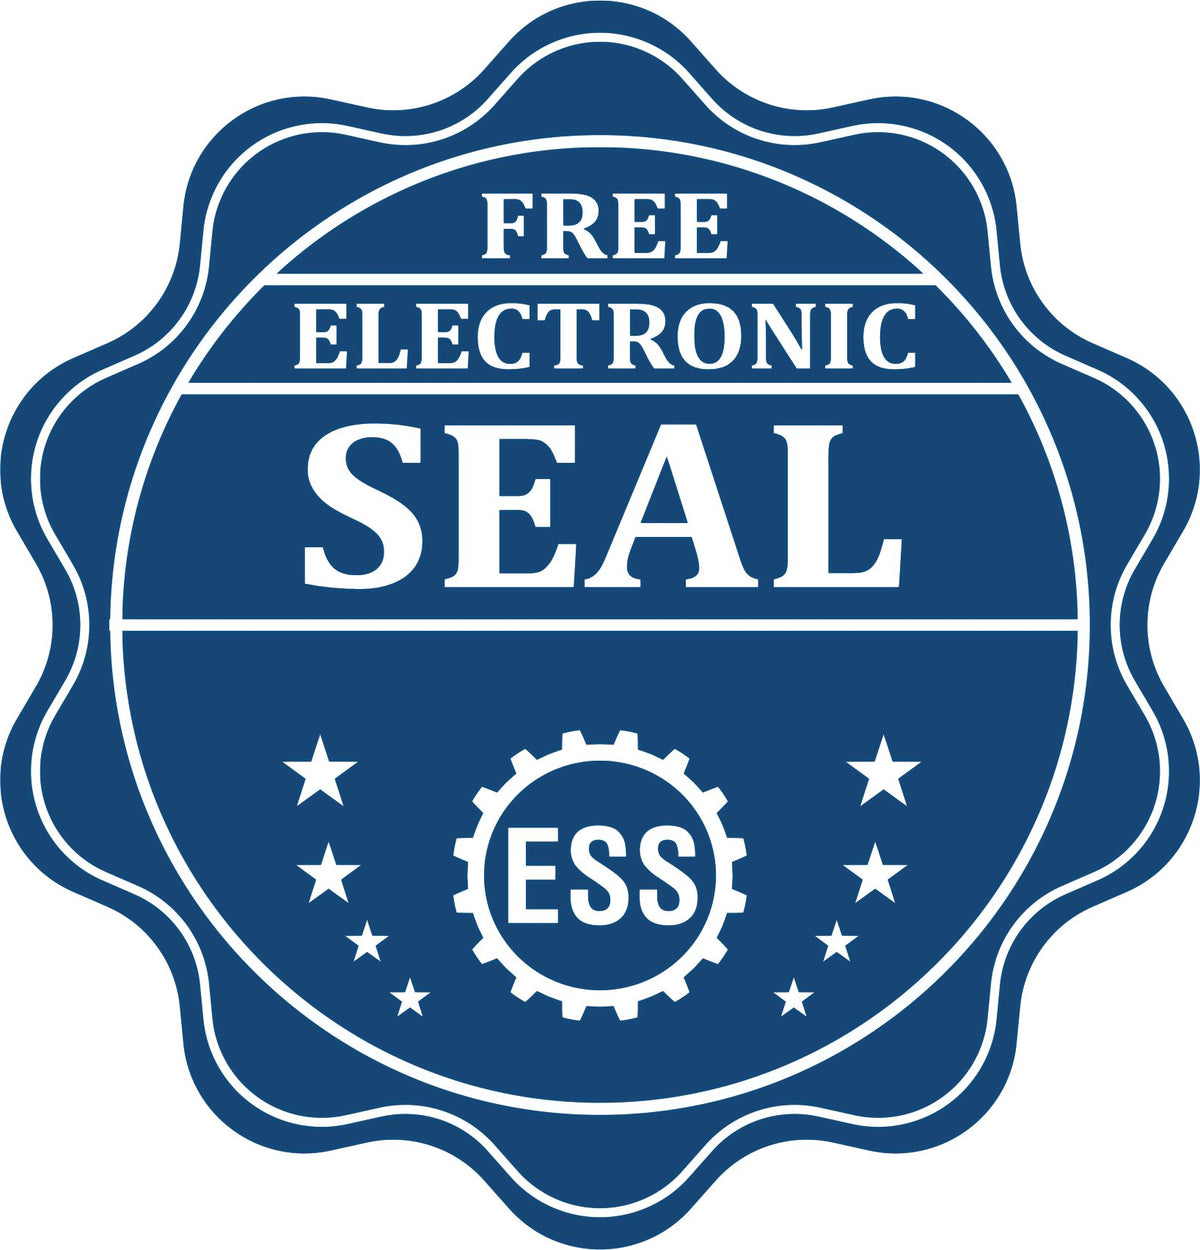 A badge showing a free electronic seal for the Long Reach Massachusetts PE Seal with stars and the ESS gear on the emblem.